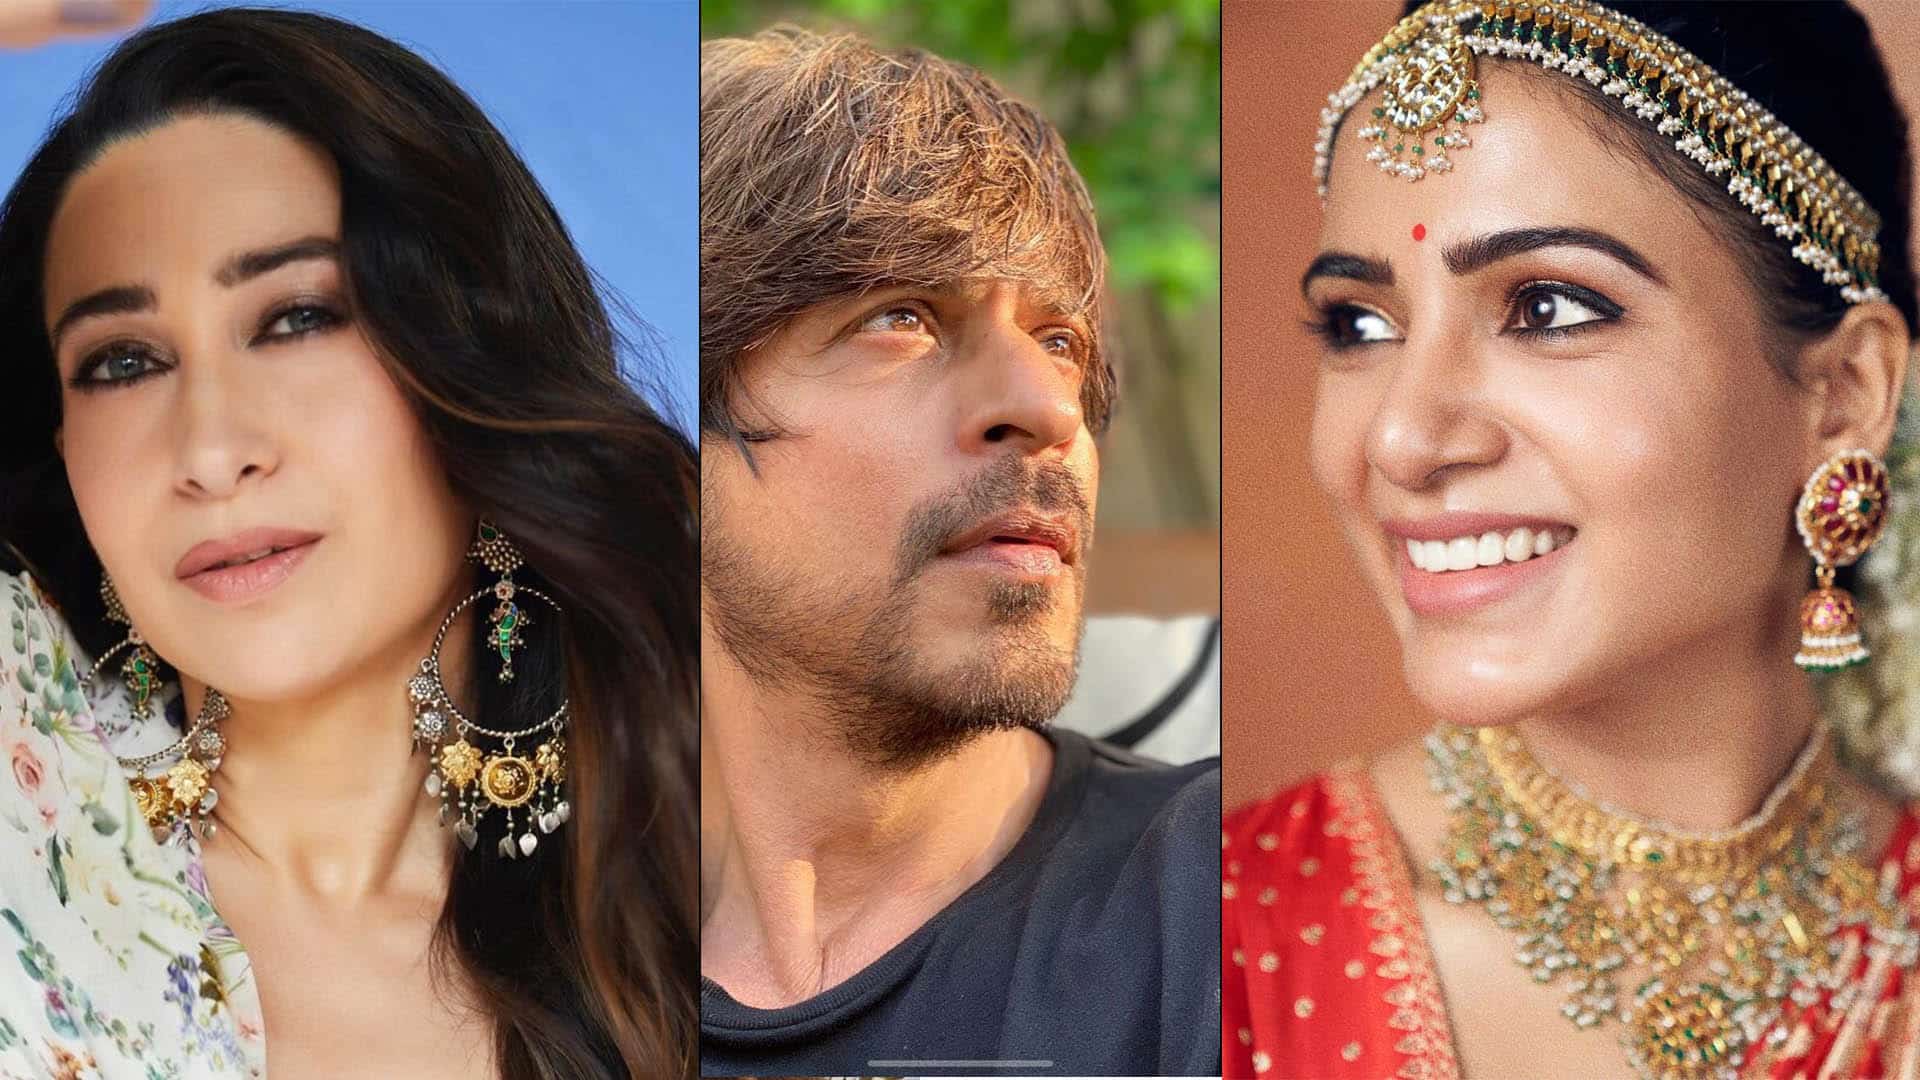 Actresses who have declined offers to work with Shah Rukh Khan; Number 3 has declined it twice